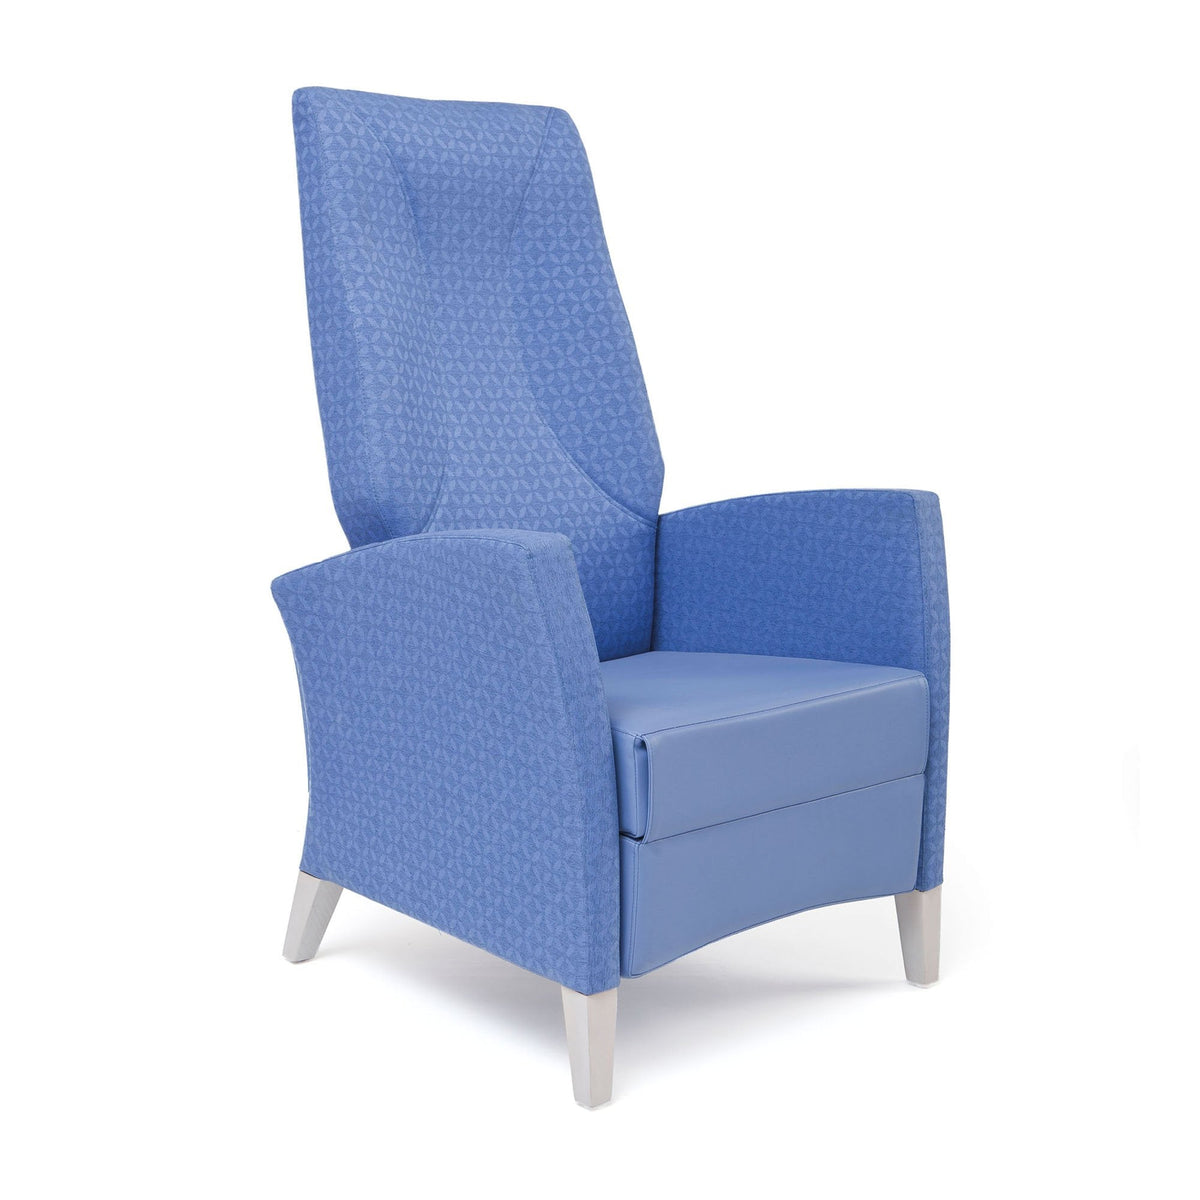 Fandango 79-62/3RPG Lounge Chair-Piaval-Contract Furniture Store